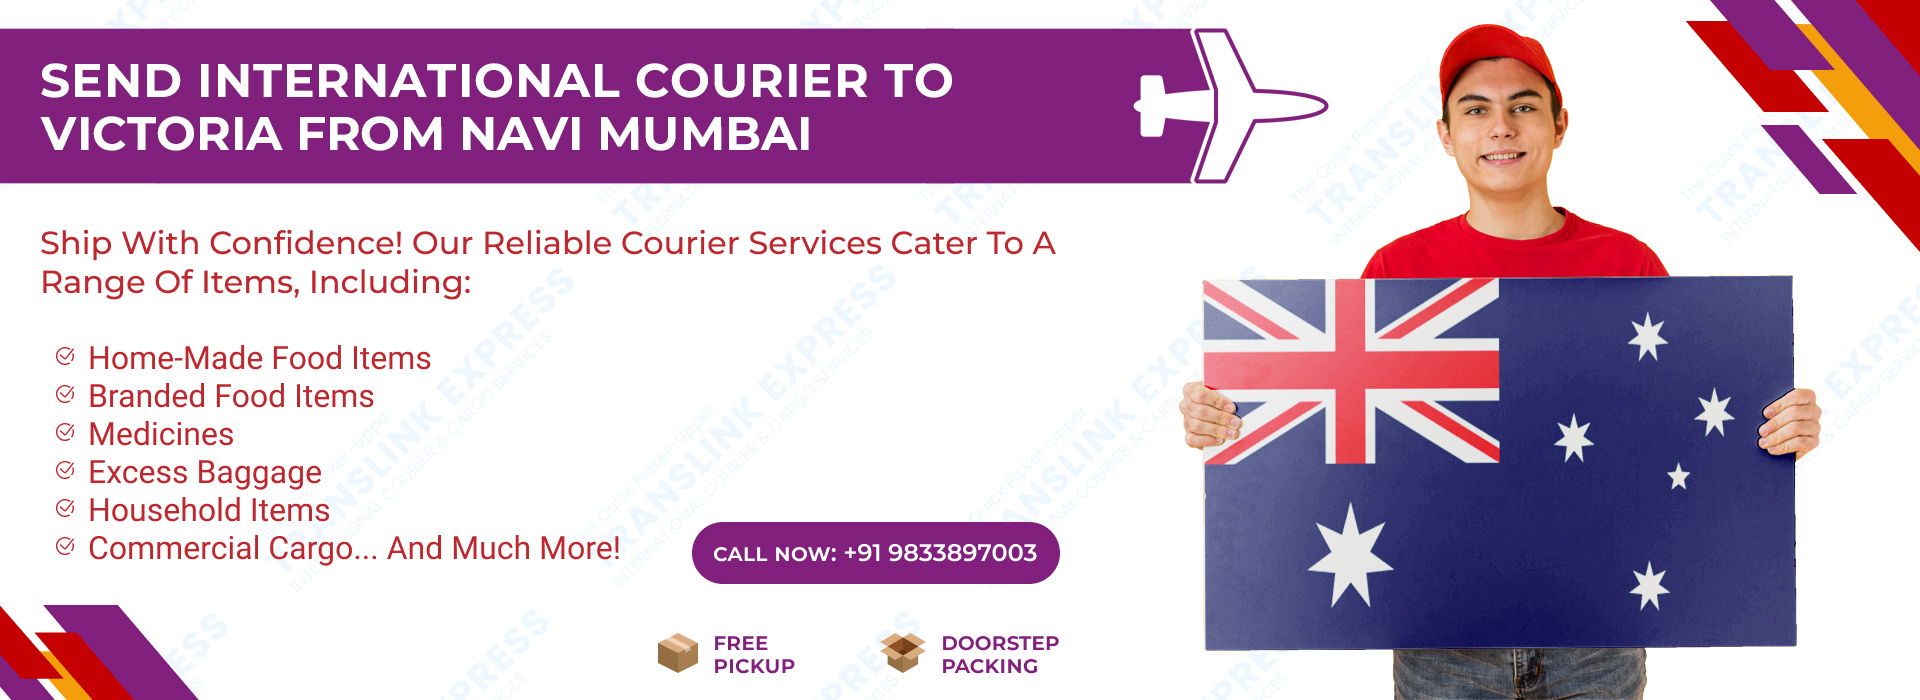 Courier to Victoria From Navi Mumbai